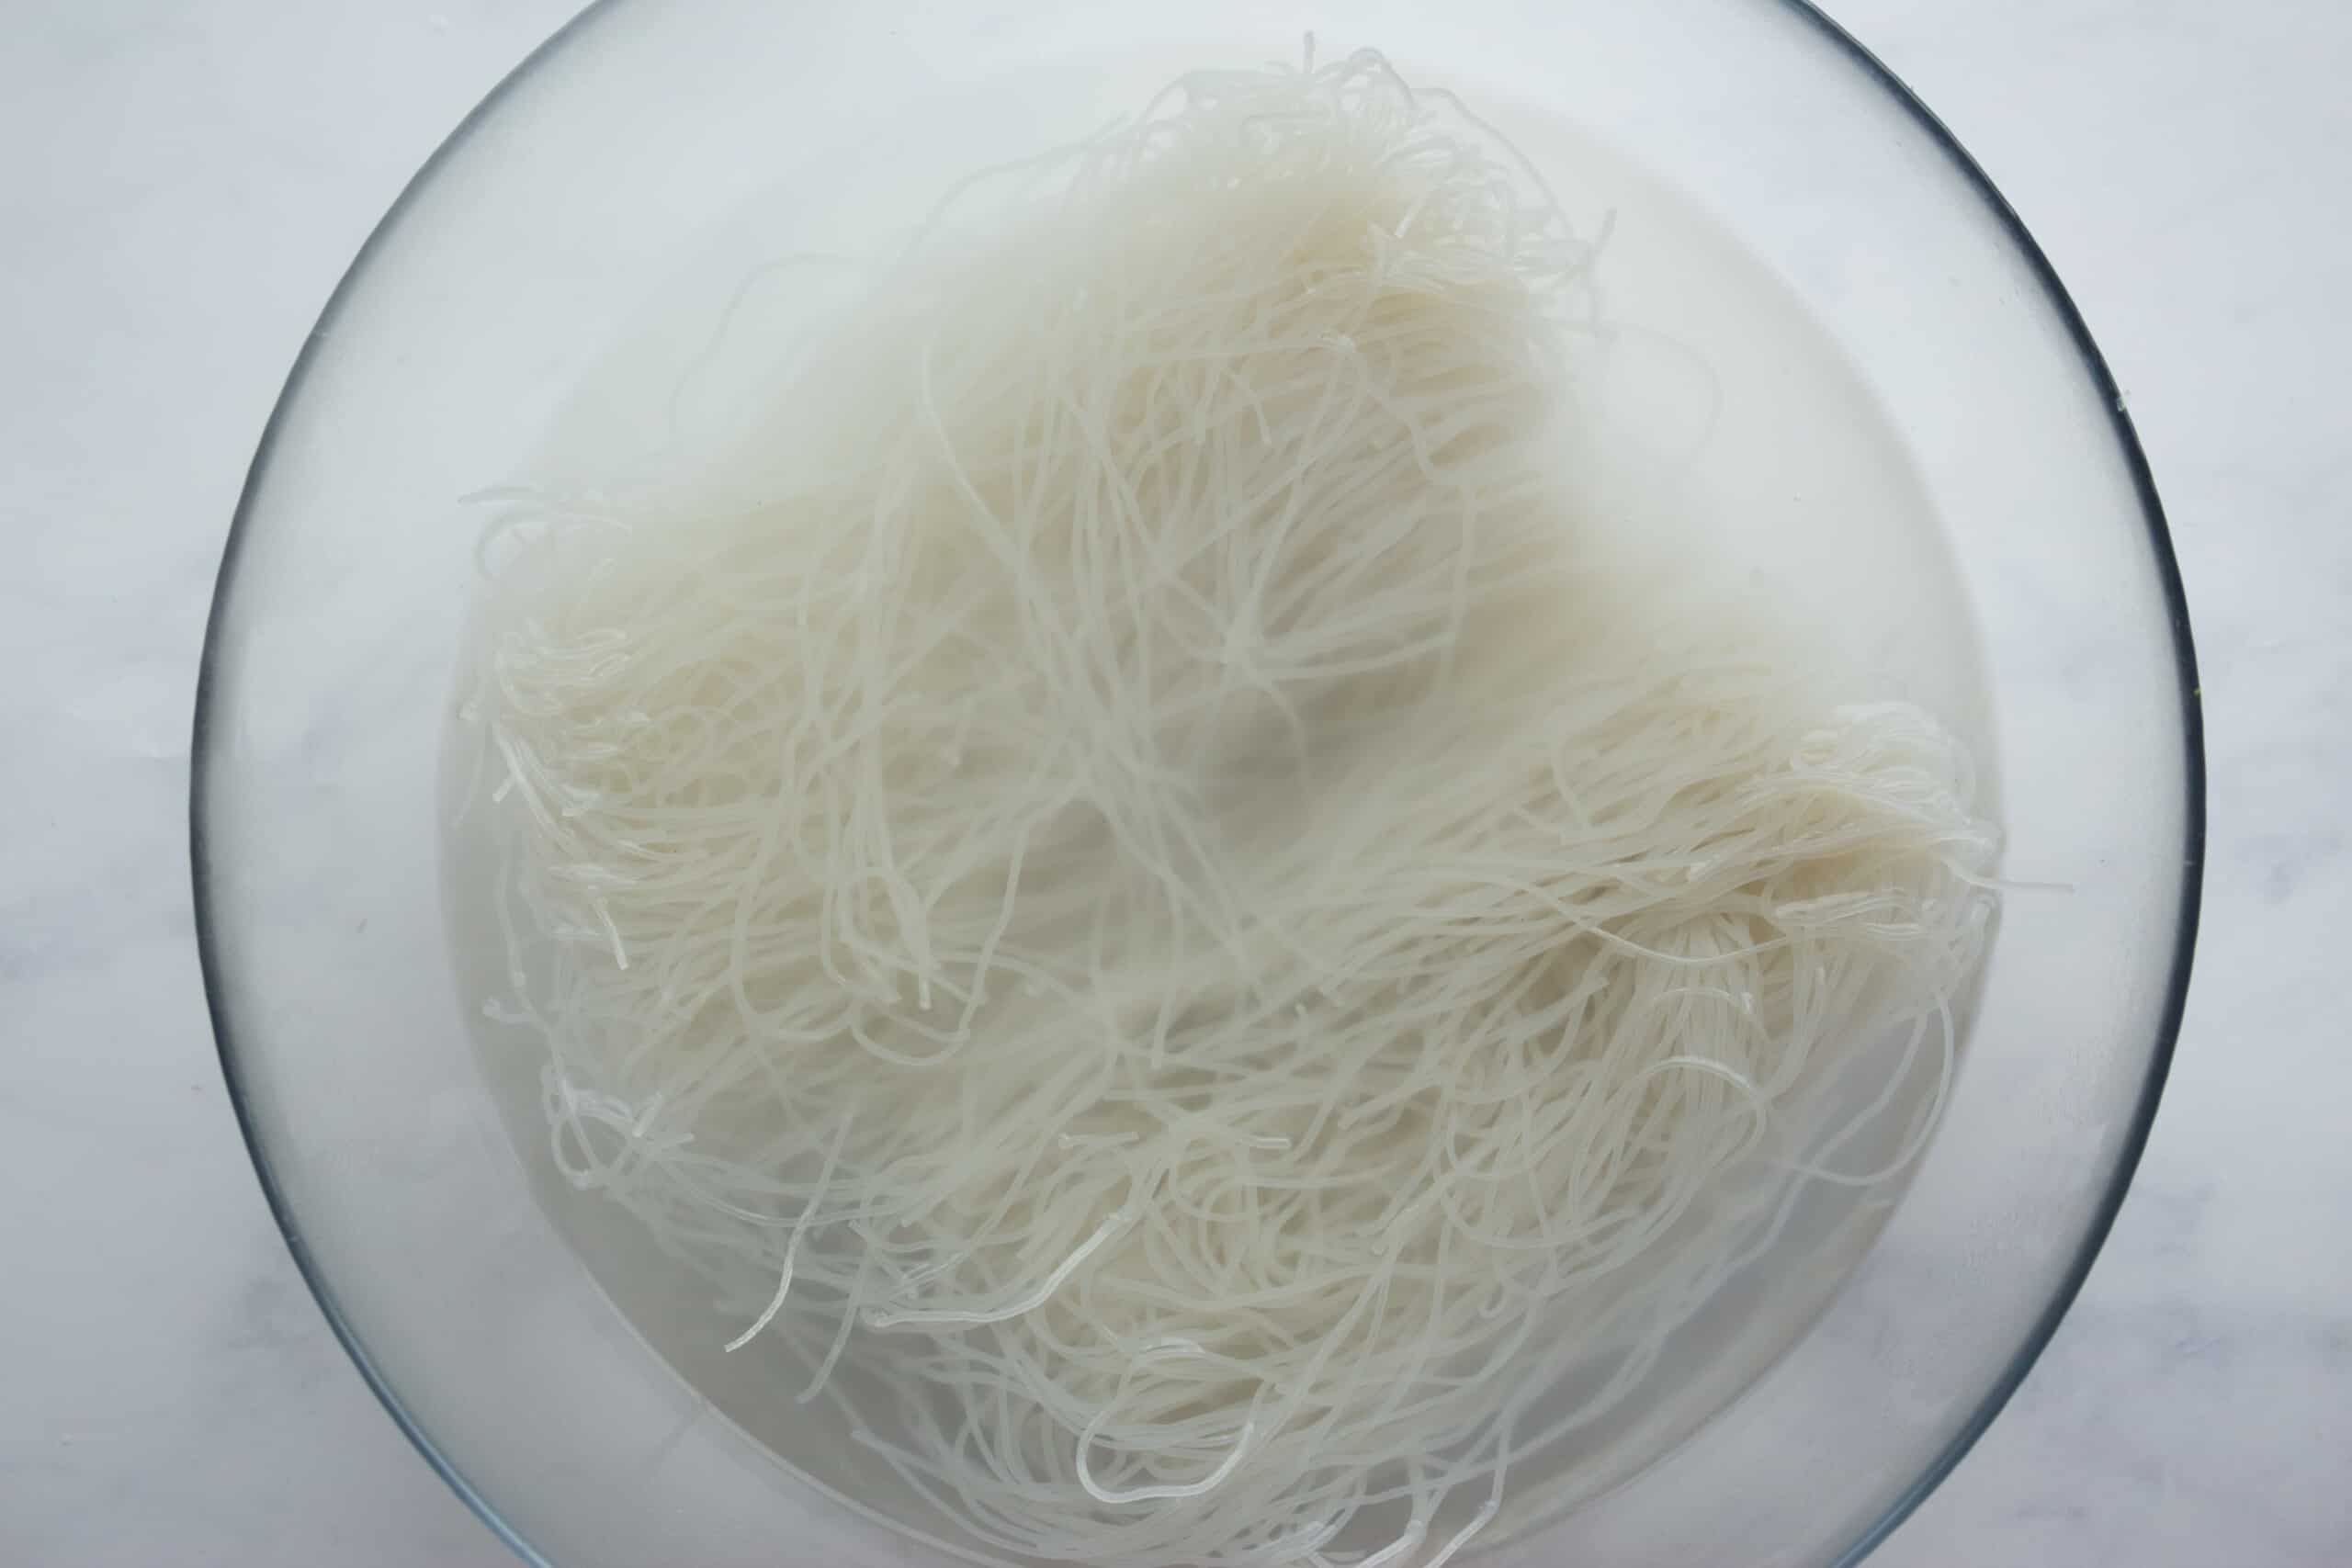 Vermicelli noodles in boiling water in a large glass bowl.